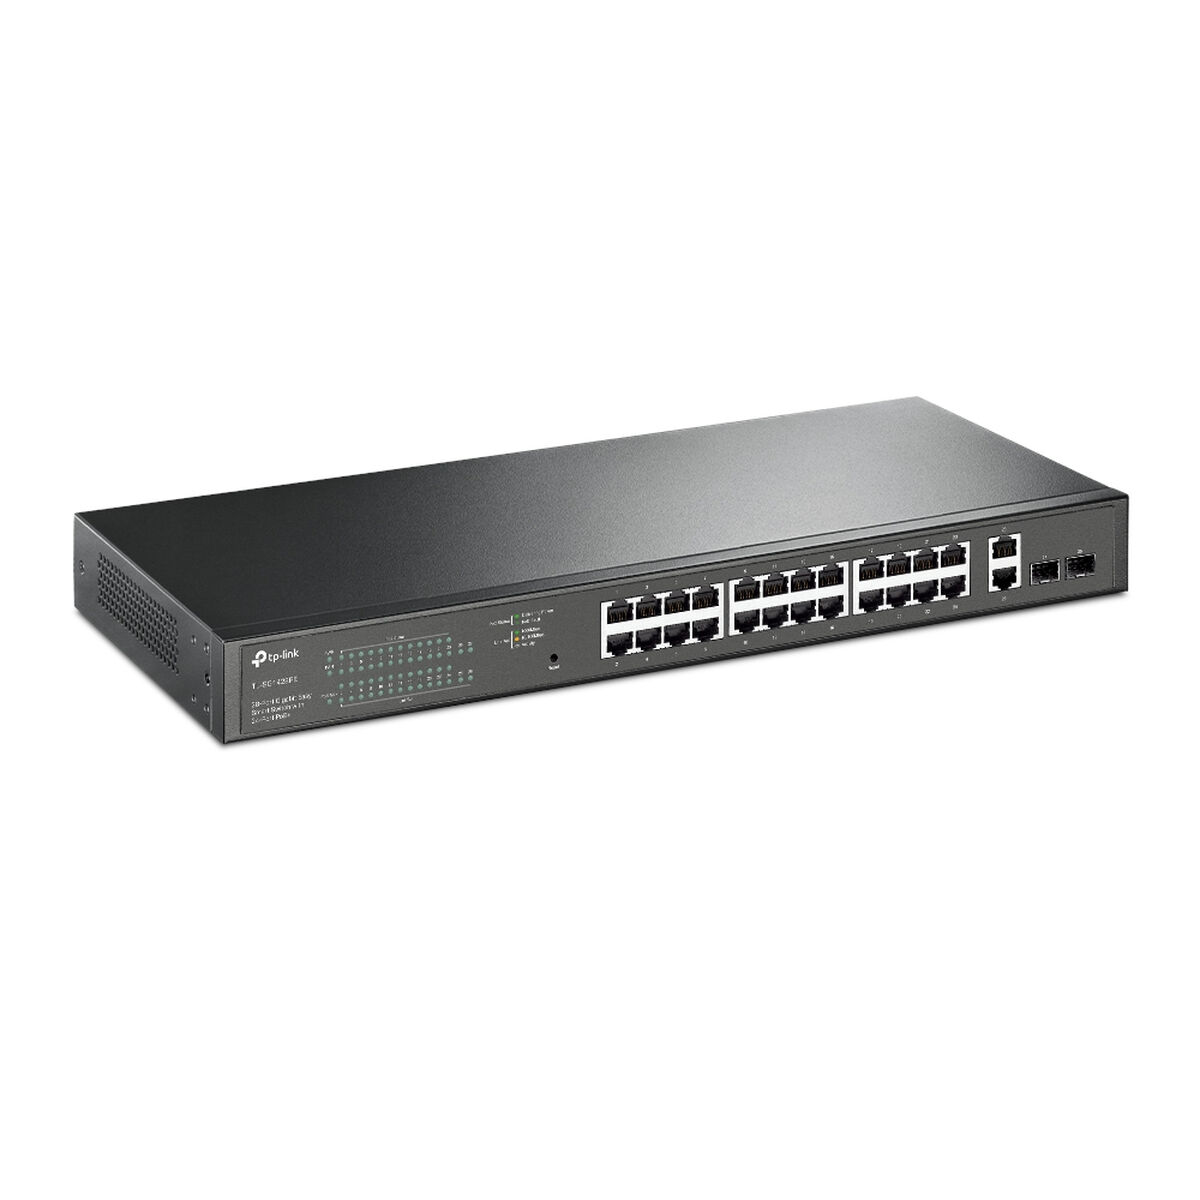 TL-SG1428PE 26 TP-LINK Switch